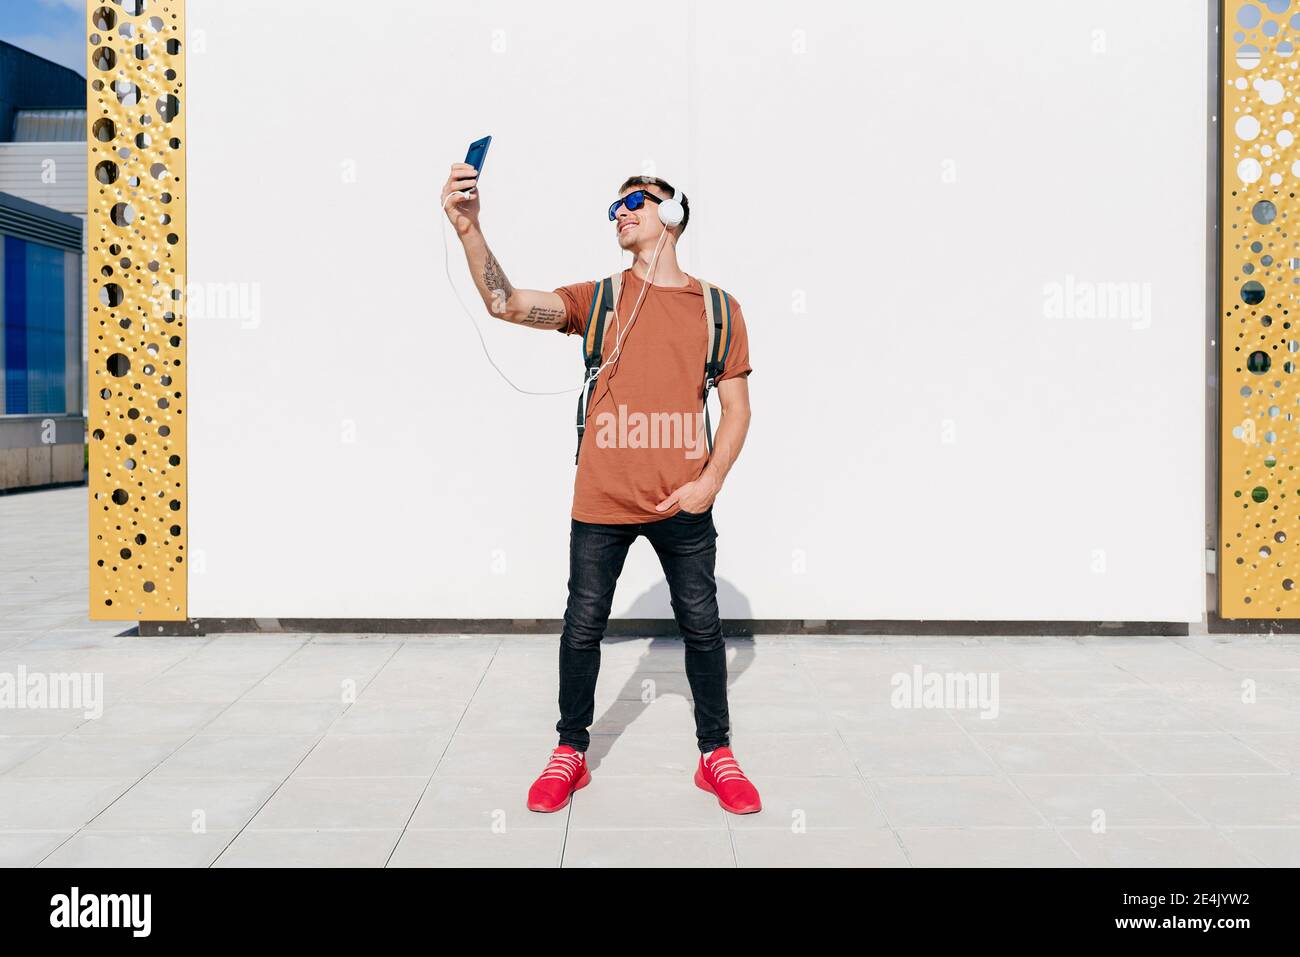 Smiling man wearing headphones taking selfie through mobile phone while standing with hands in pockets against wall Stock Photo